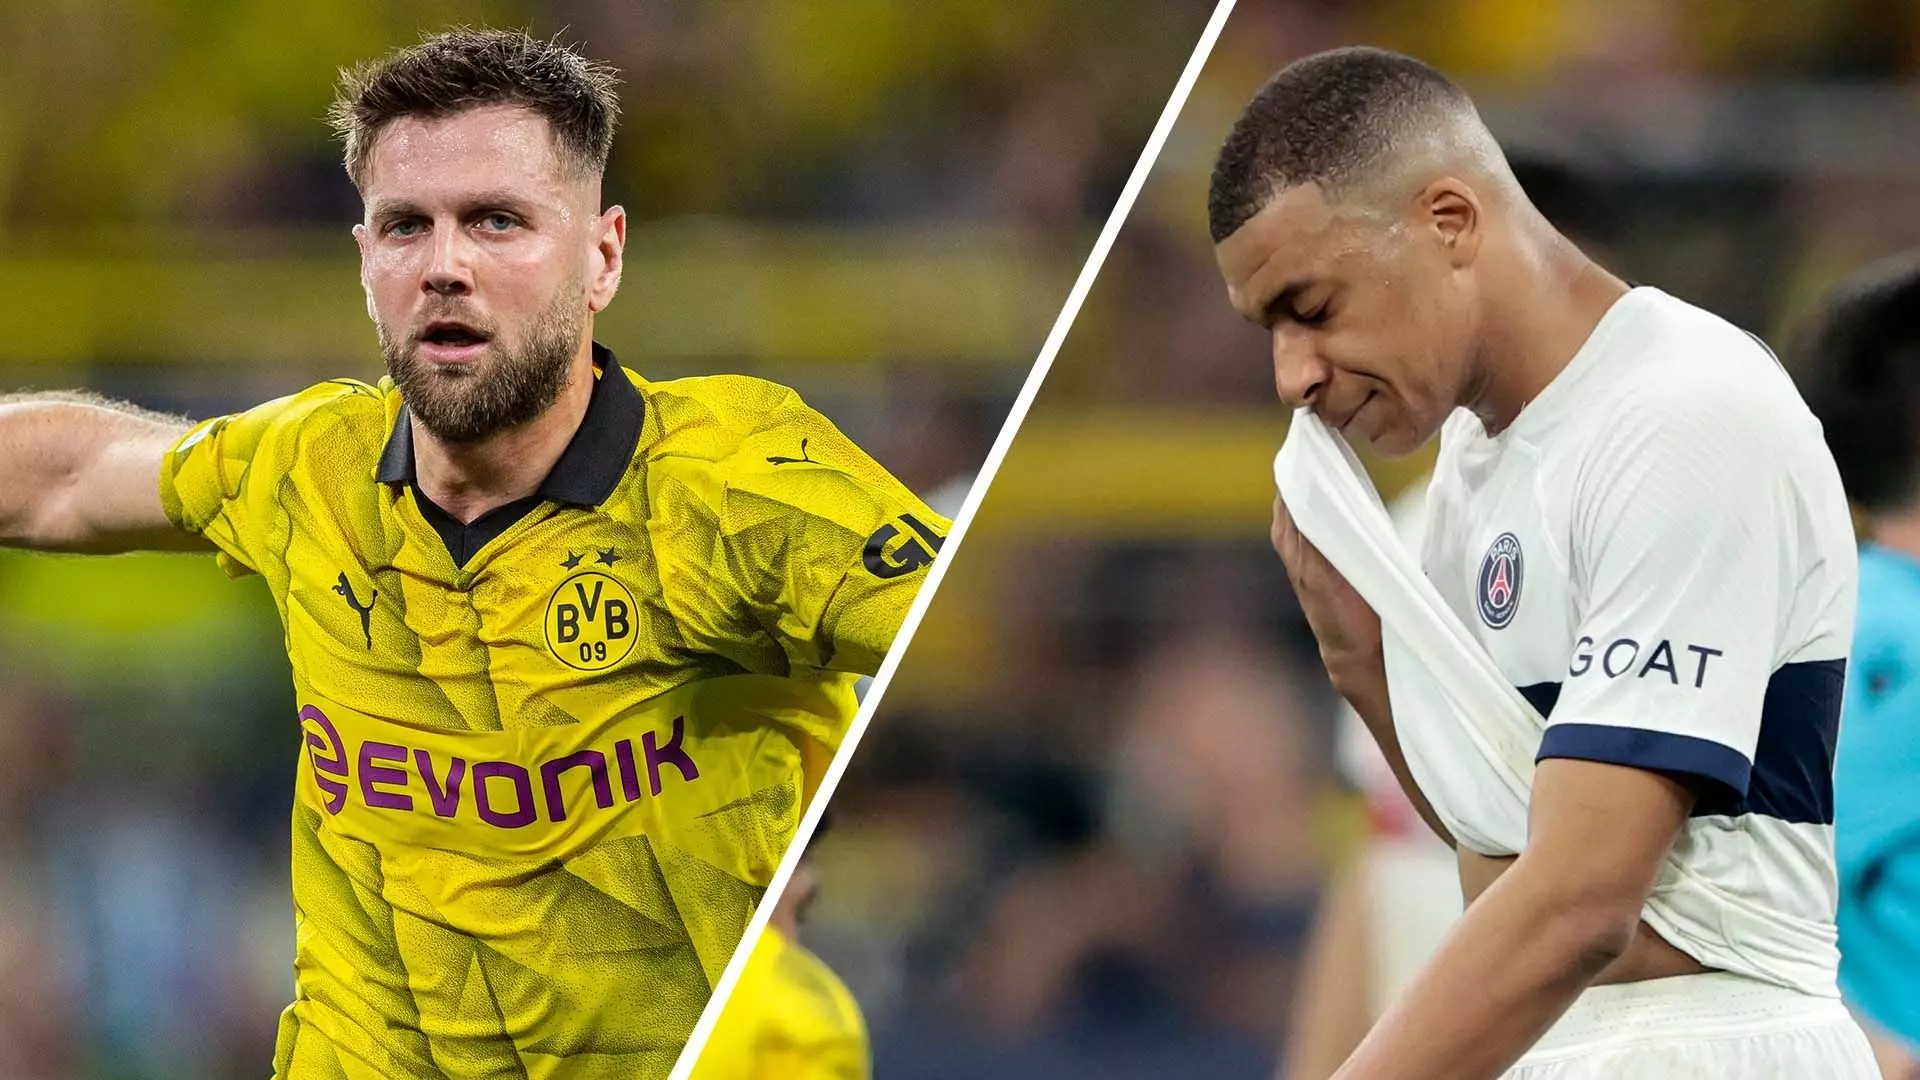 The Confidence of Kylian Mbappé and PSG to Overturn 1-0 Deficit Against Borussia Dortmund